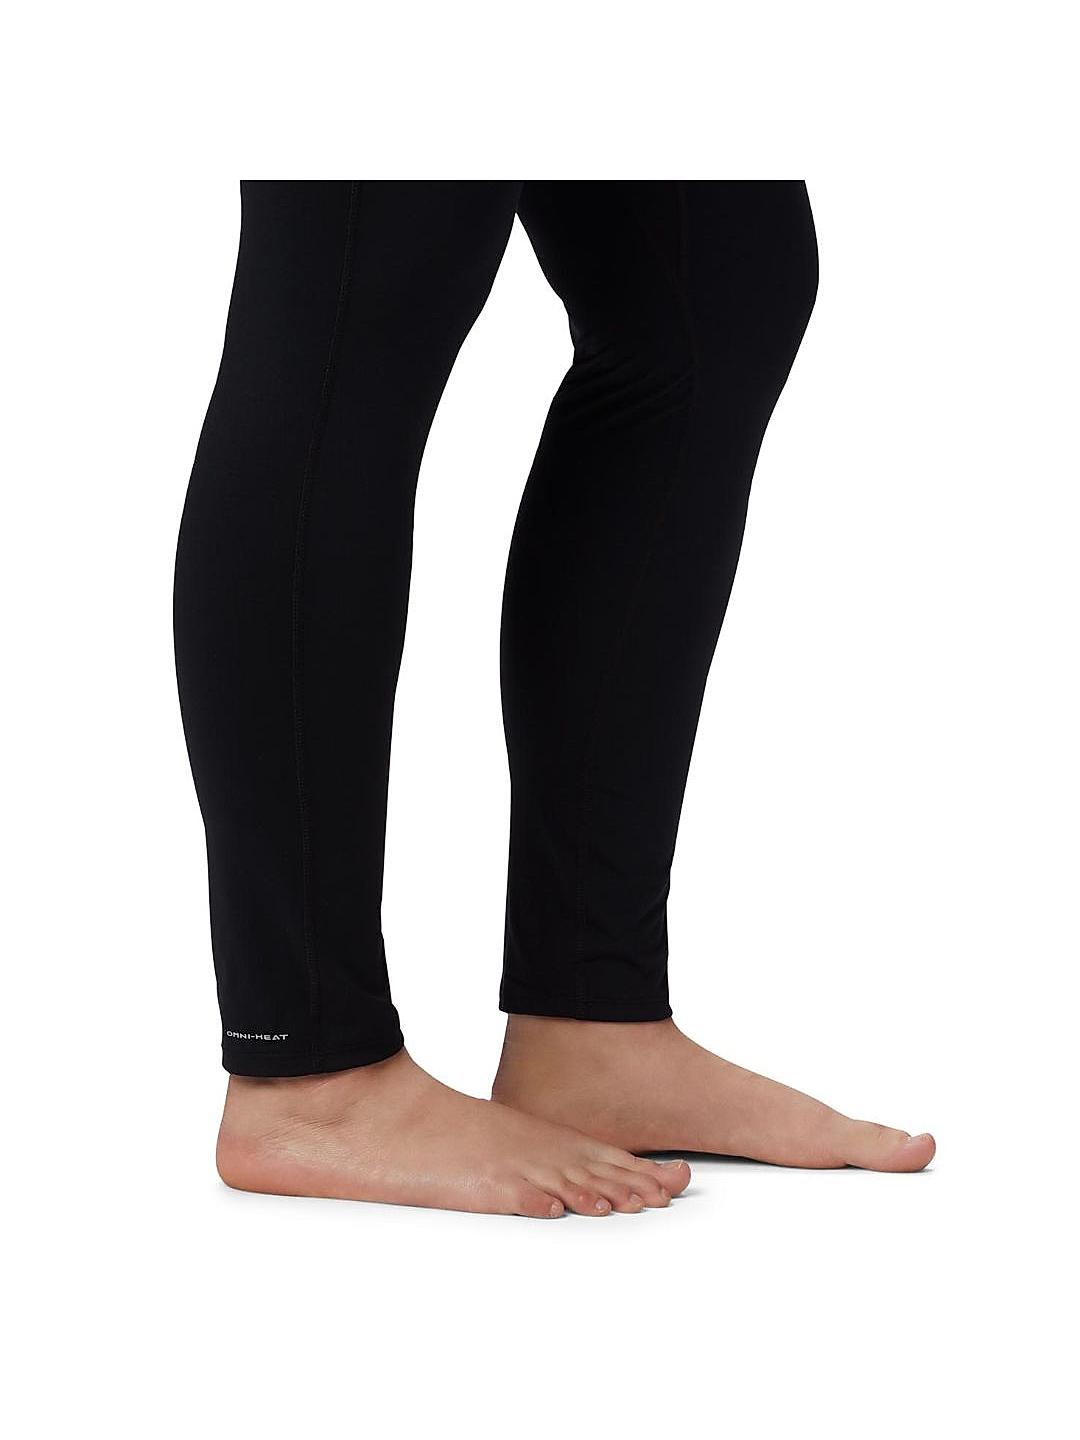 Columbia Women's Midweight Stretch Tights, Black 010, Small price in UAE,  UAE